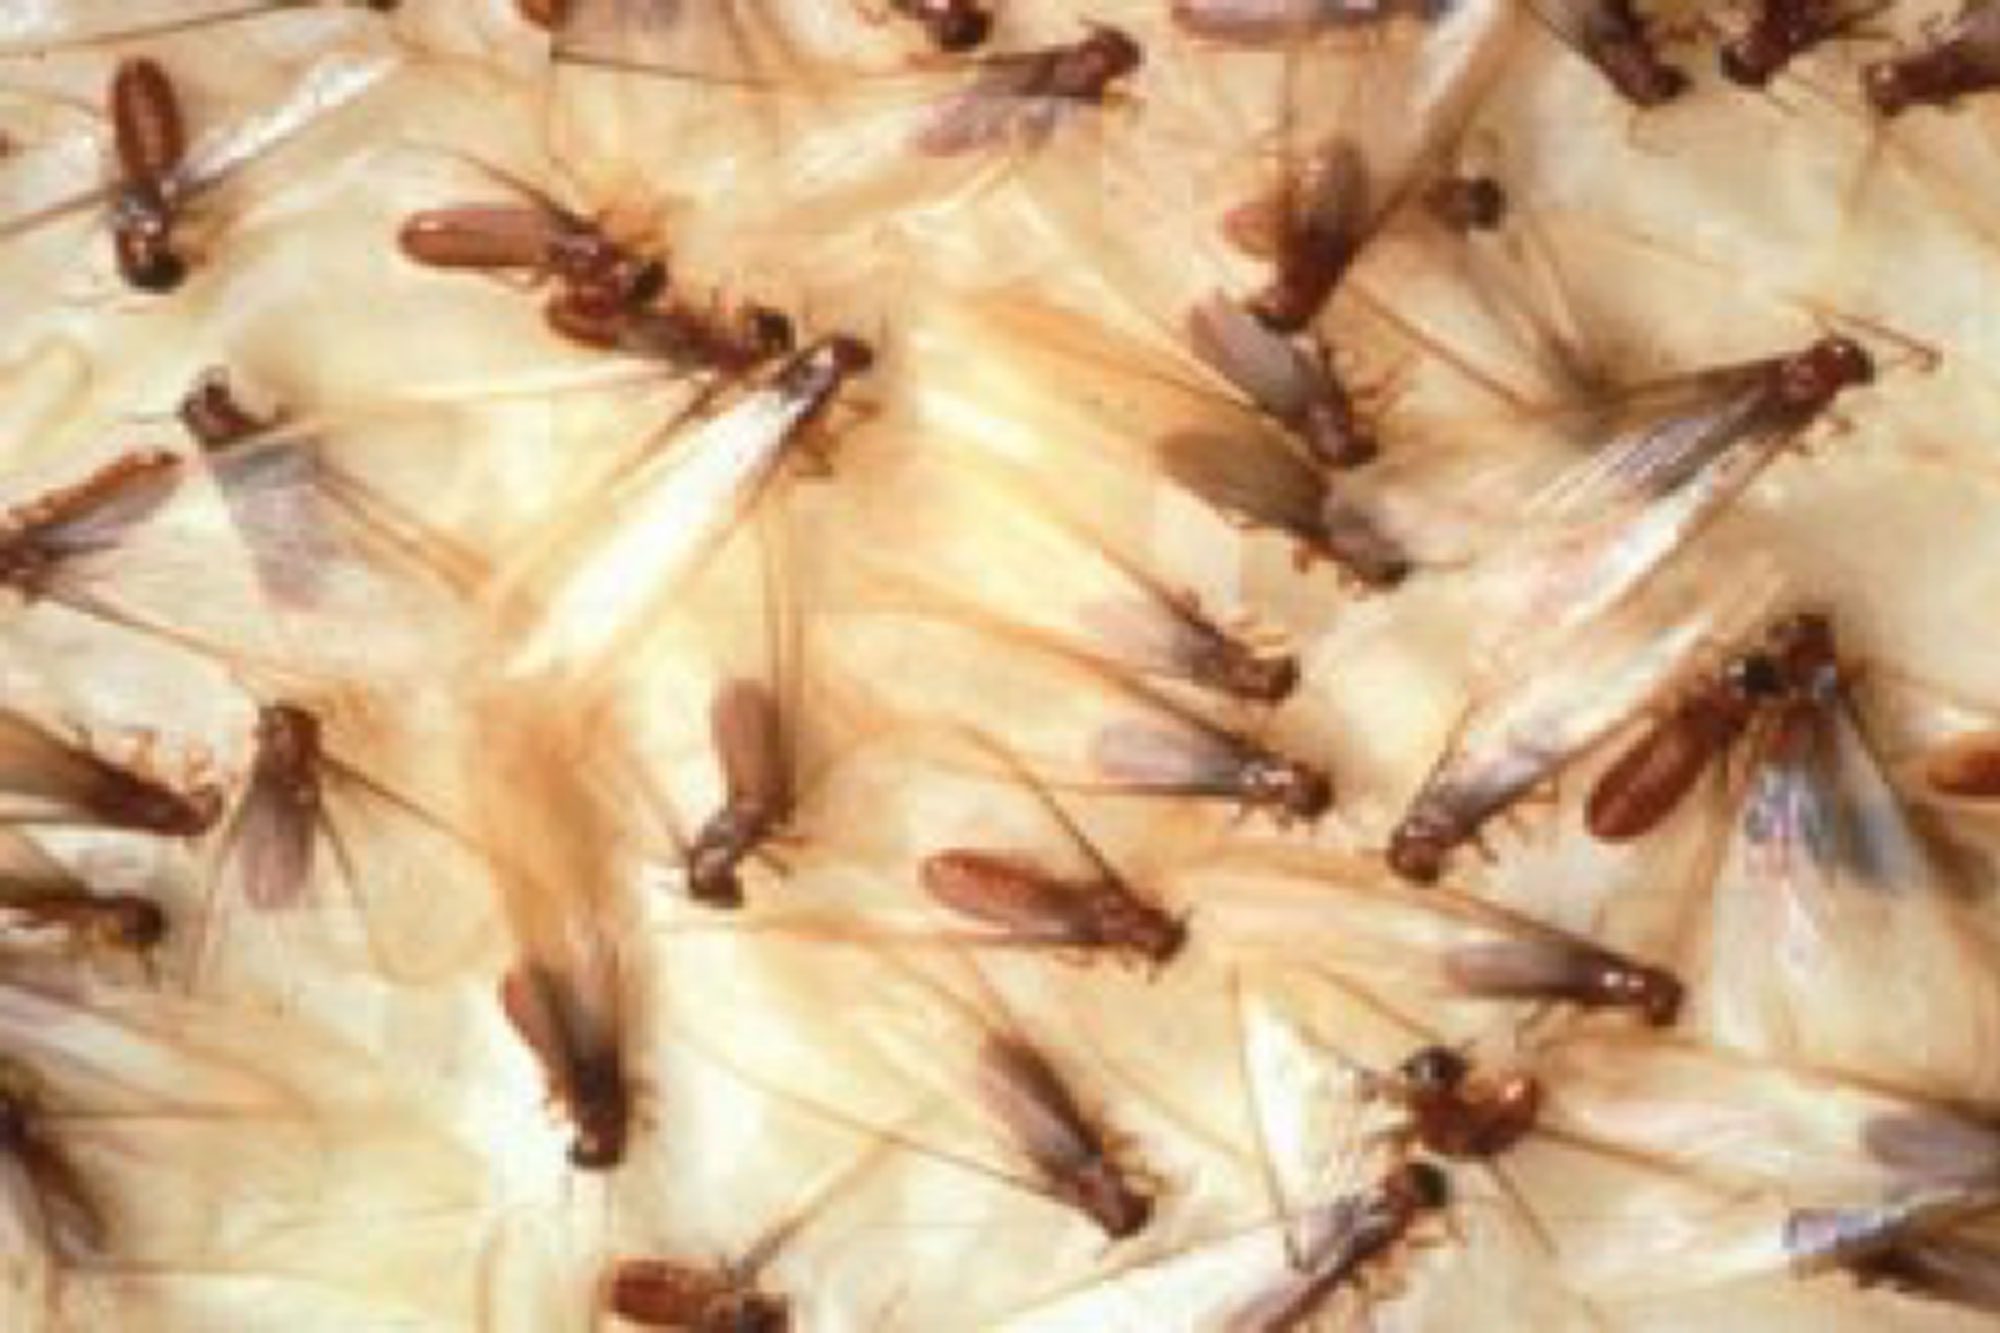 Treatment Of Termites In Tampa